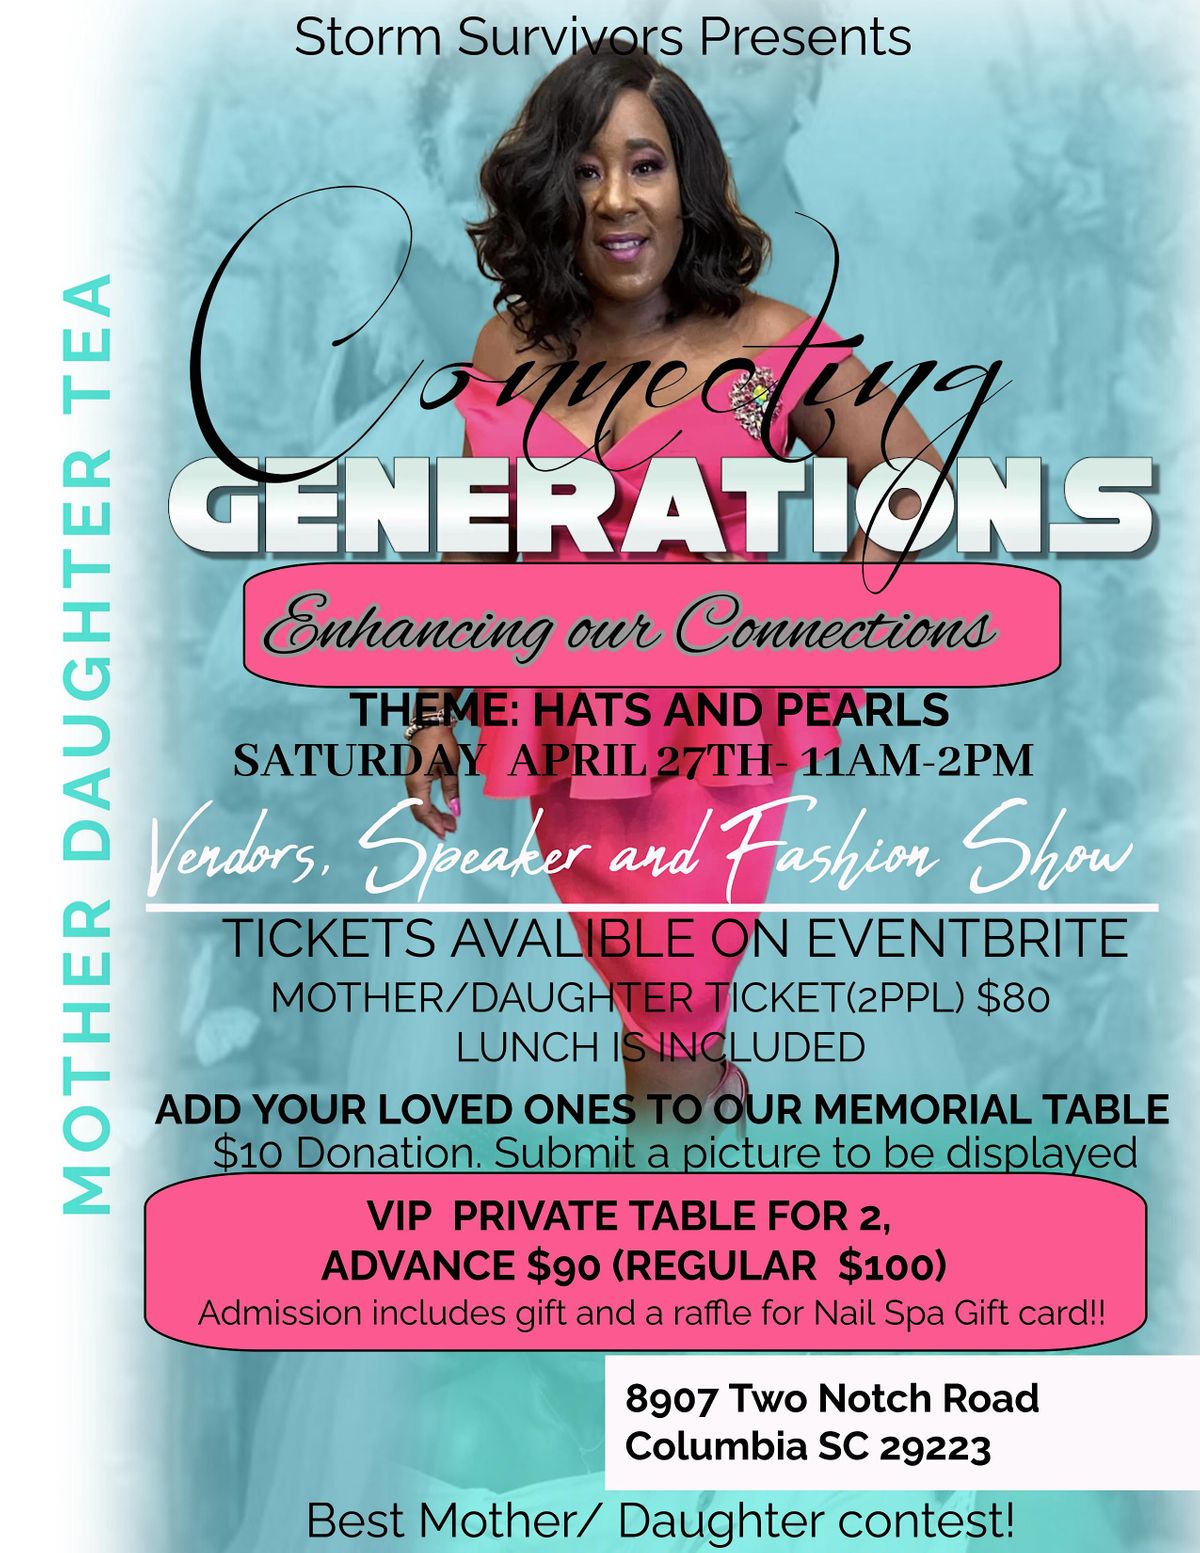 Storm Survivors Presents Connecting Generations-Enhancing our Connections